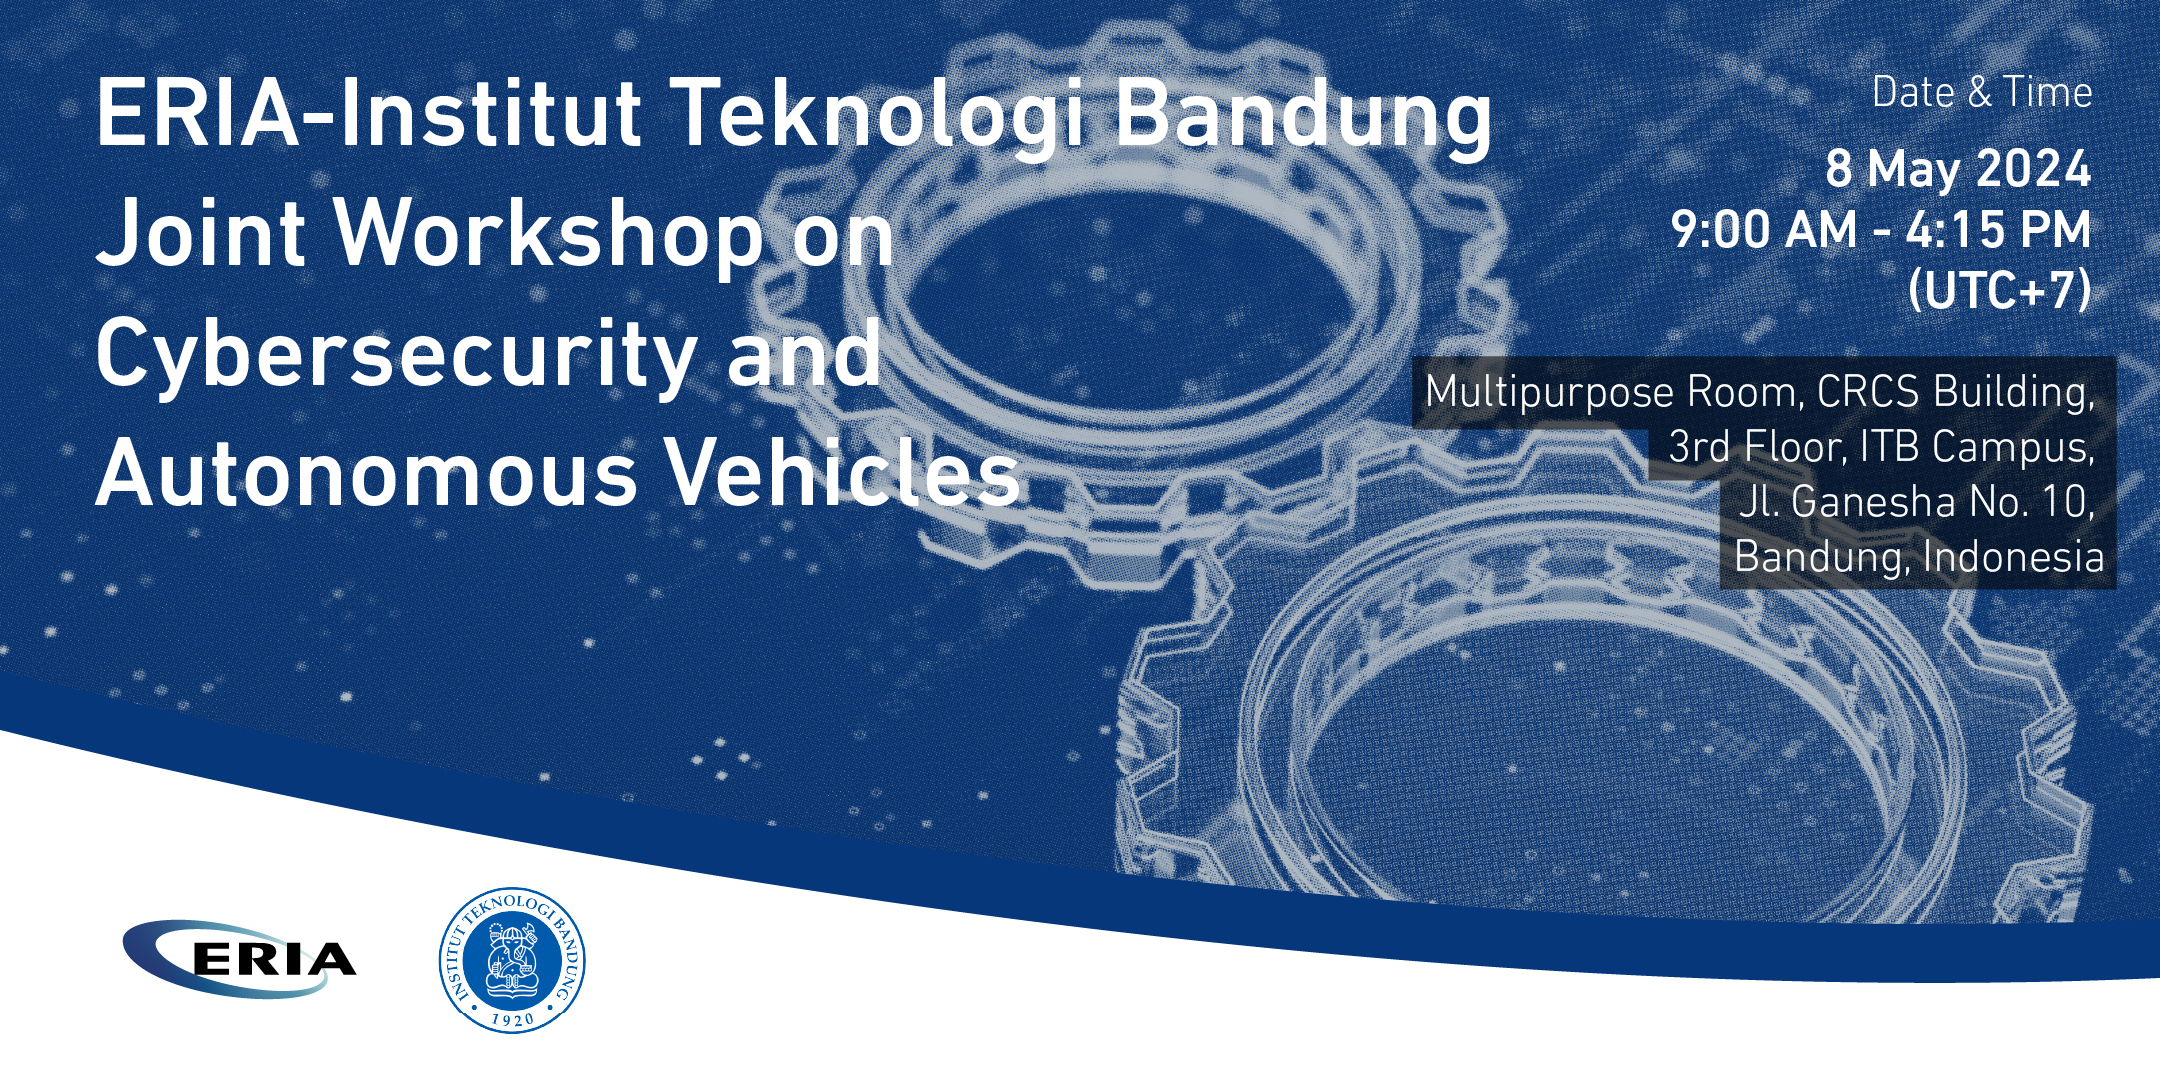 ERIA-Institut Teknologi Bandung (ITB) Joint Workshop on Cybersecurity and Autonomous Vehicles